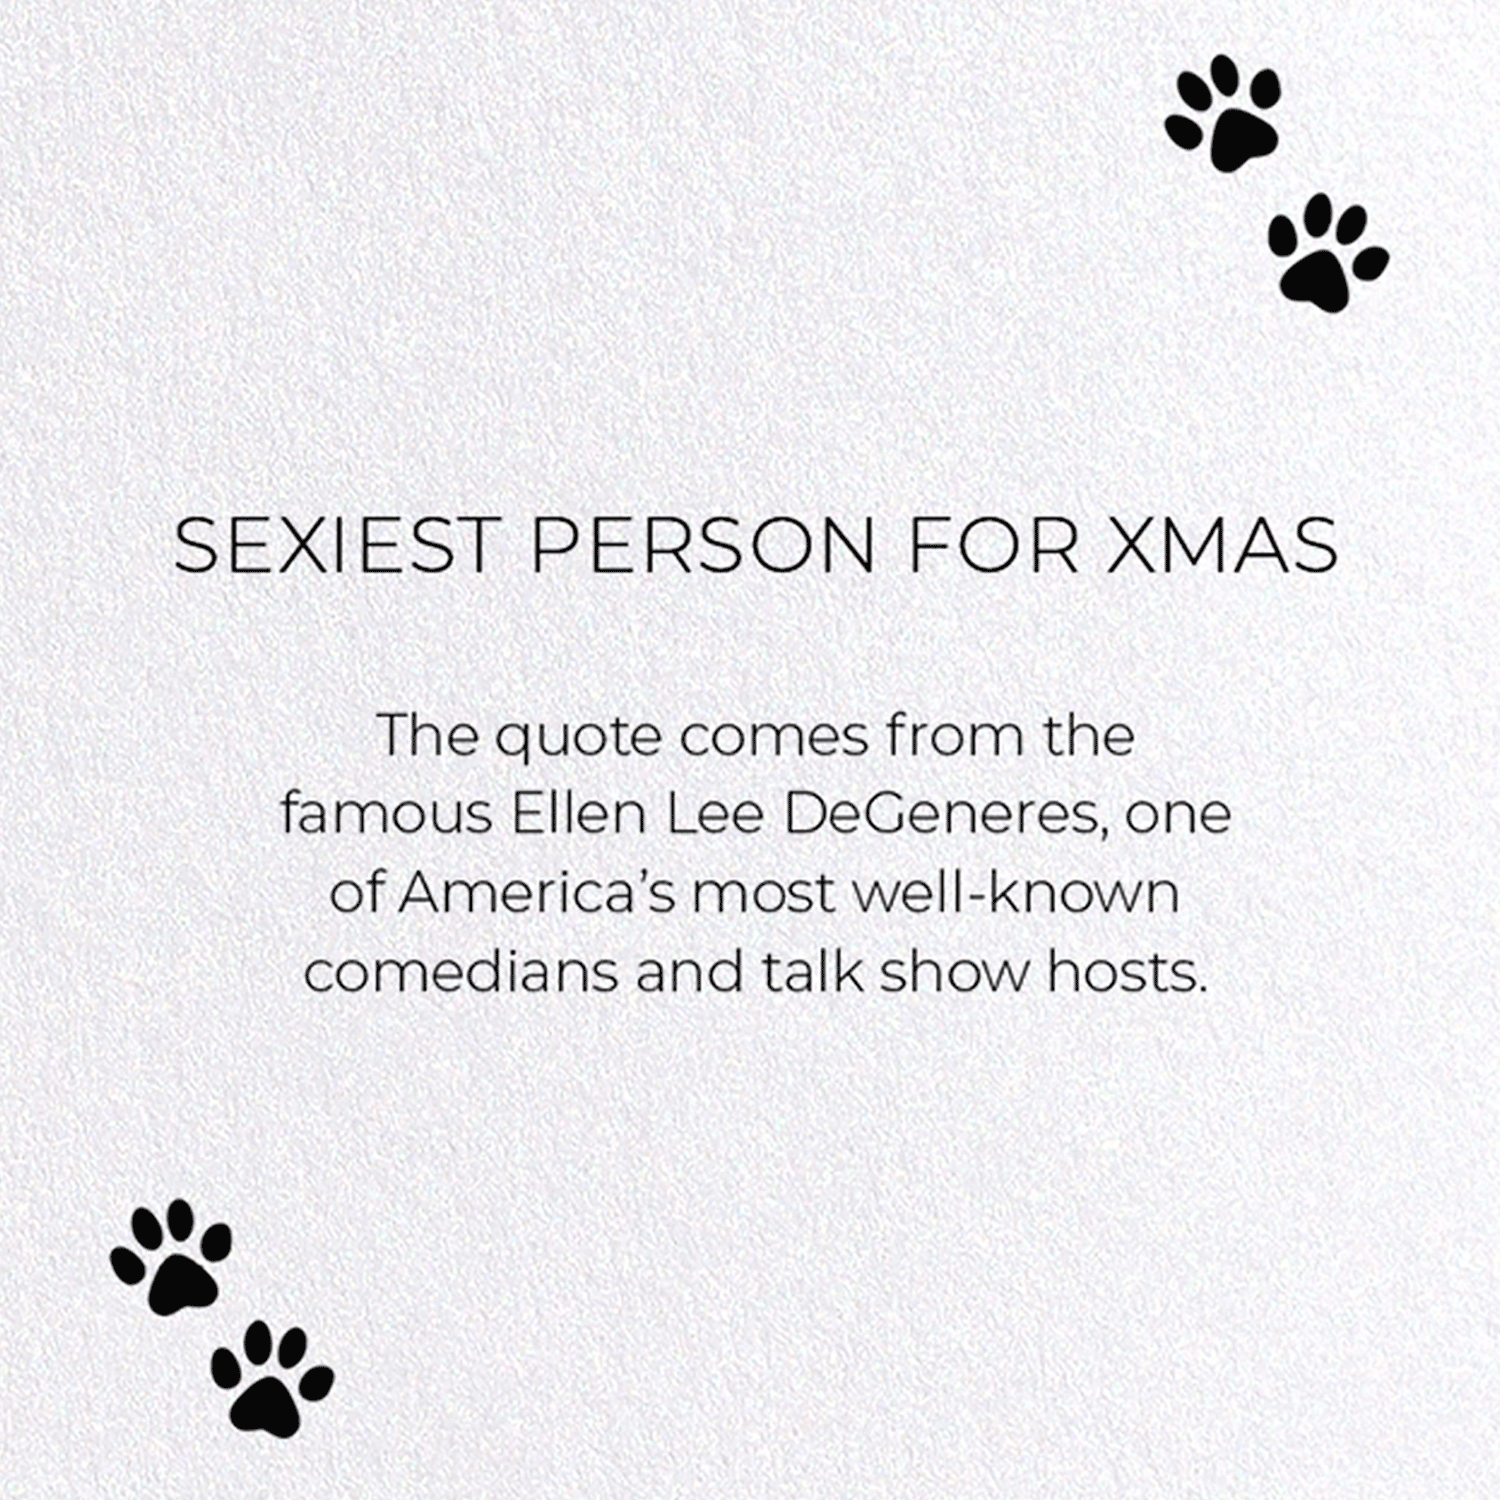 SEXIEST PERSON FOR XMAS: Funny Animal Greeting Card